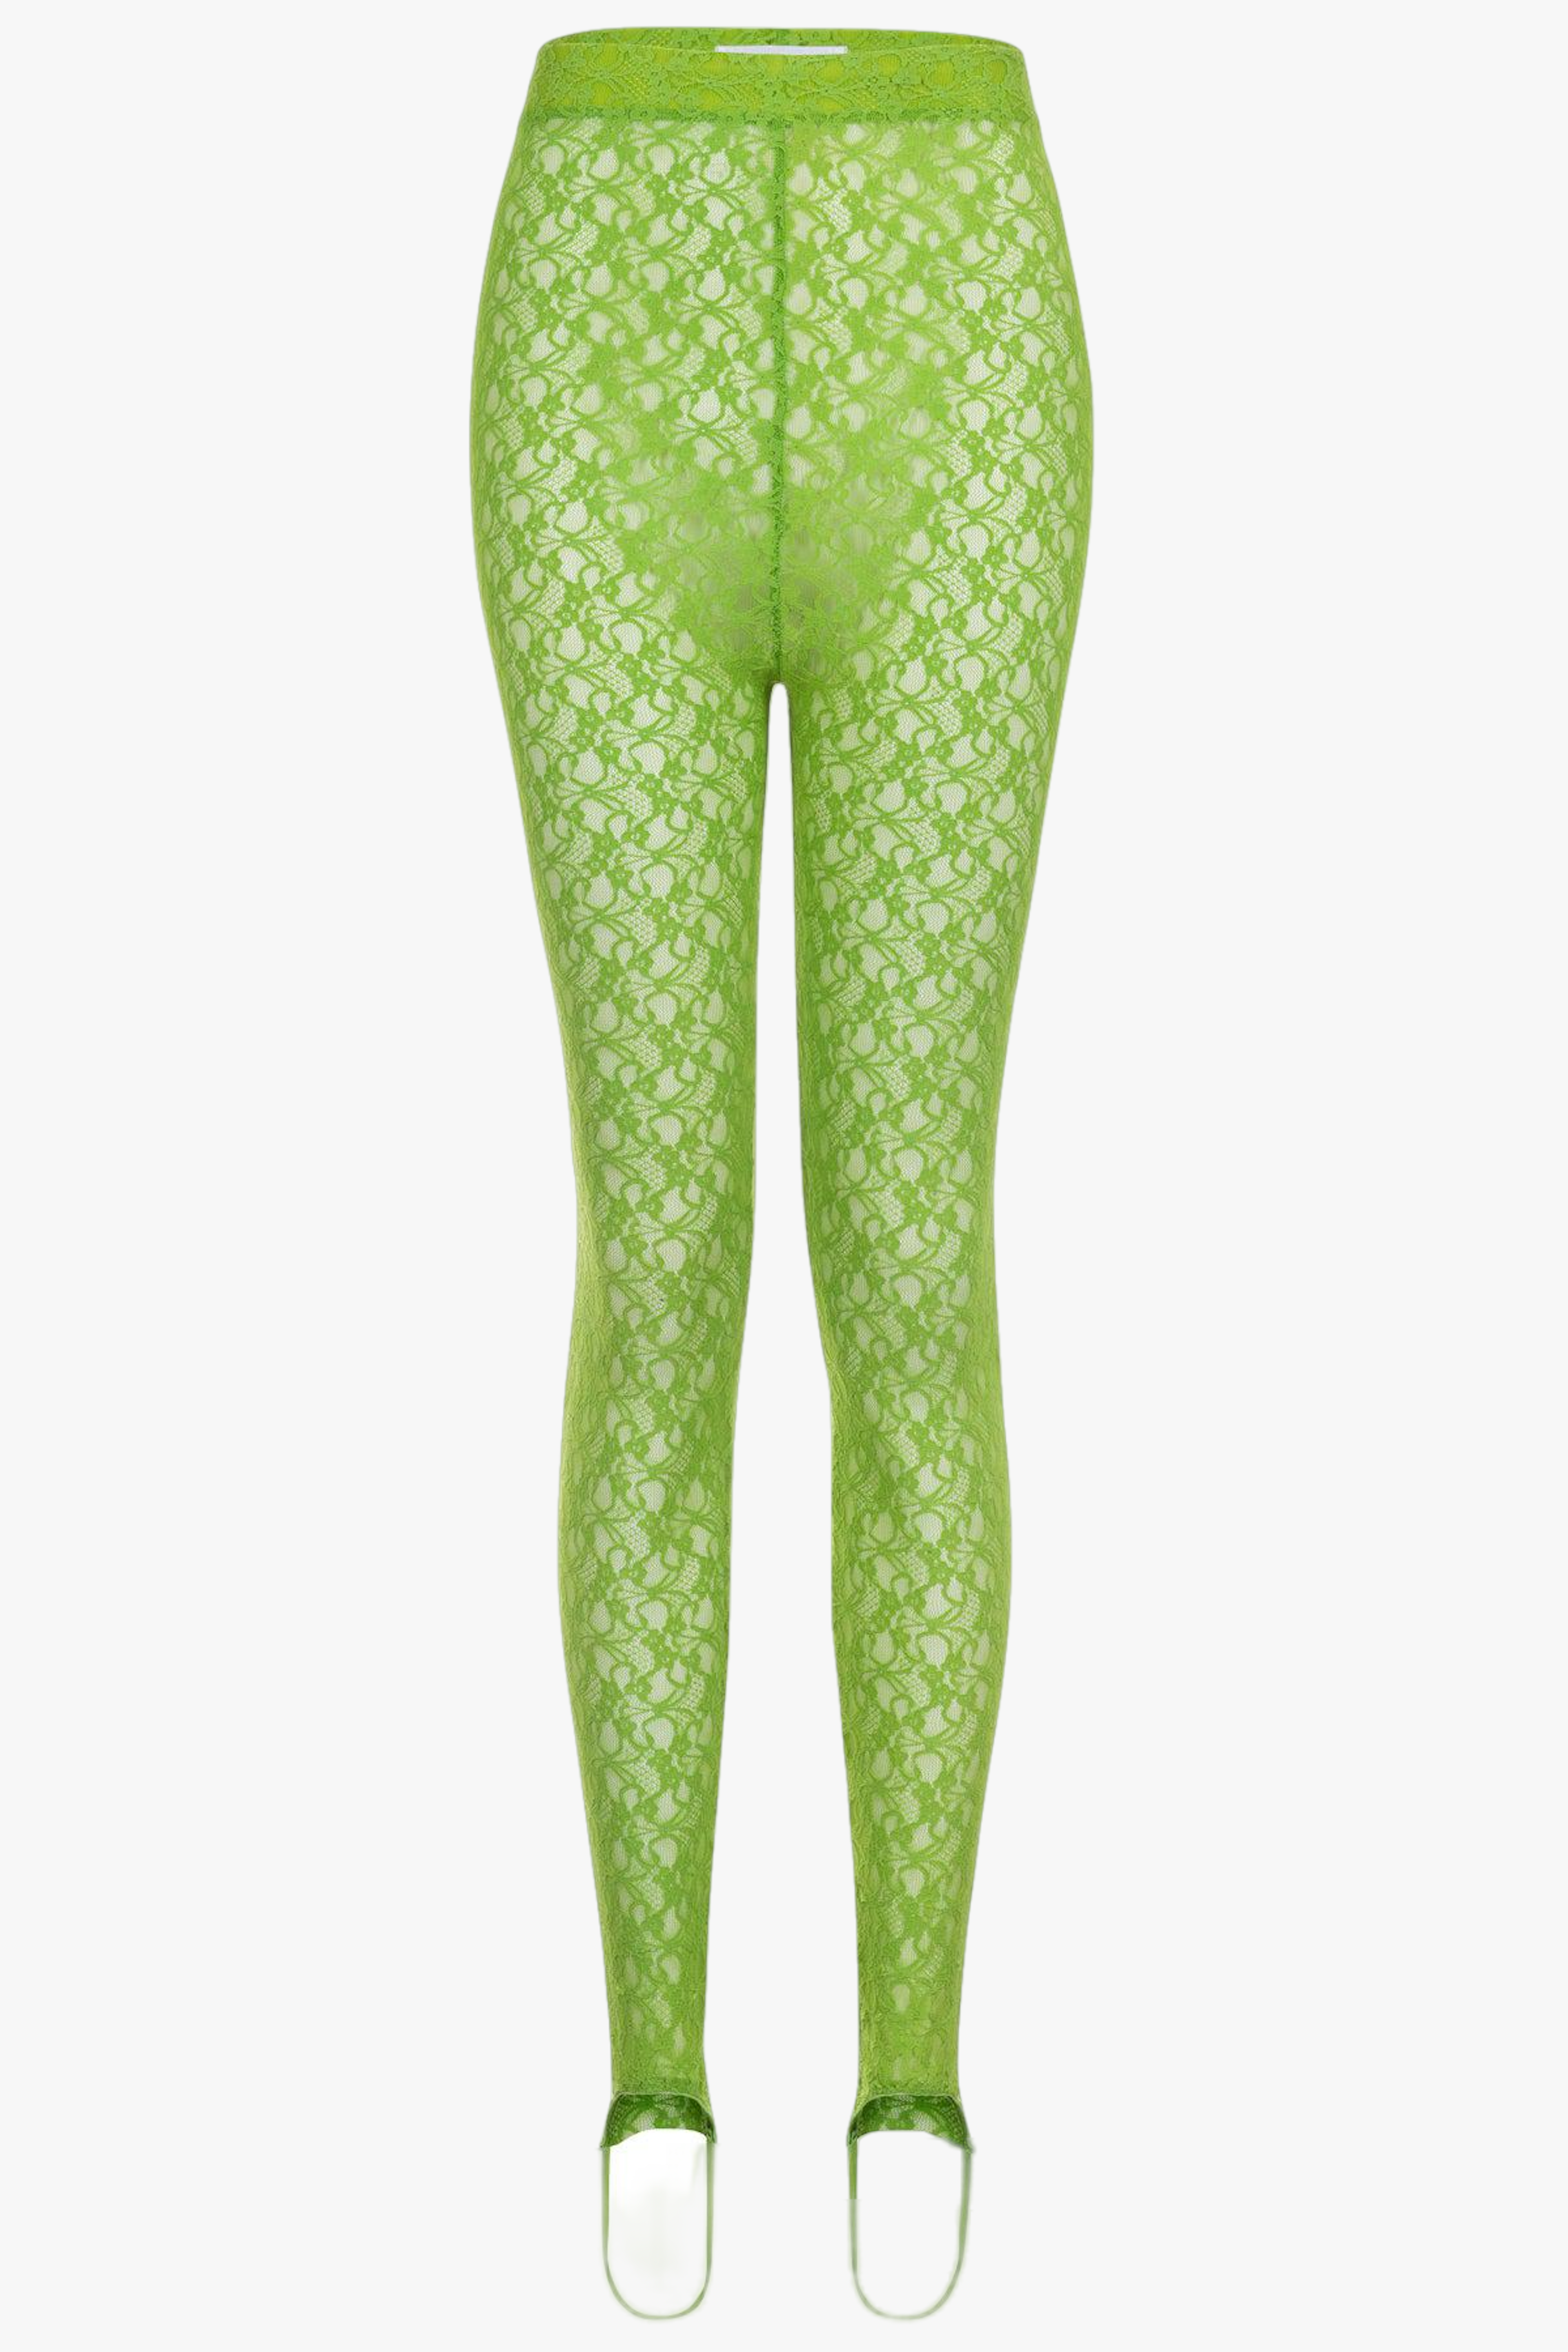 Shop Sadie Lime Green Lace Stirrup Leggings- Made to Order from Natalie and  Alanna at Seezona